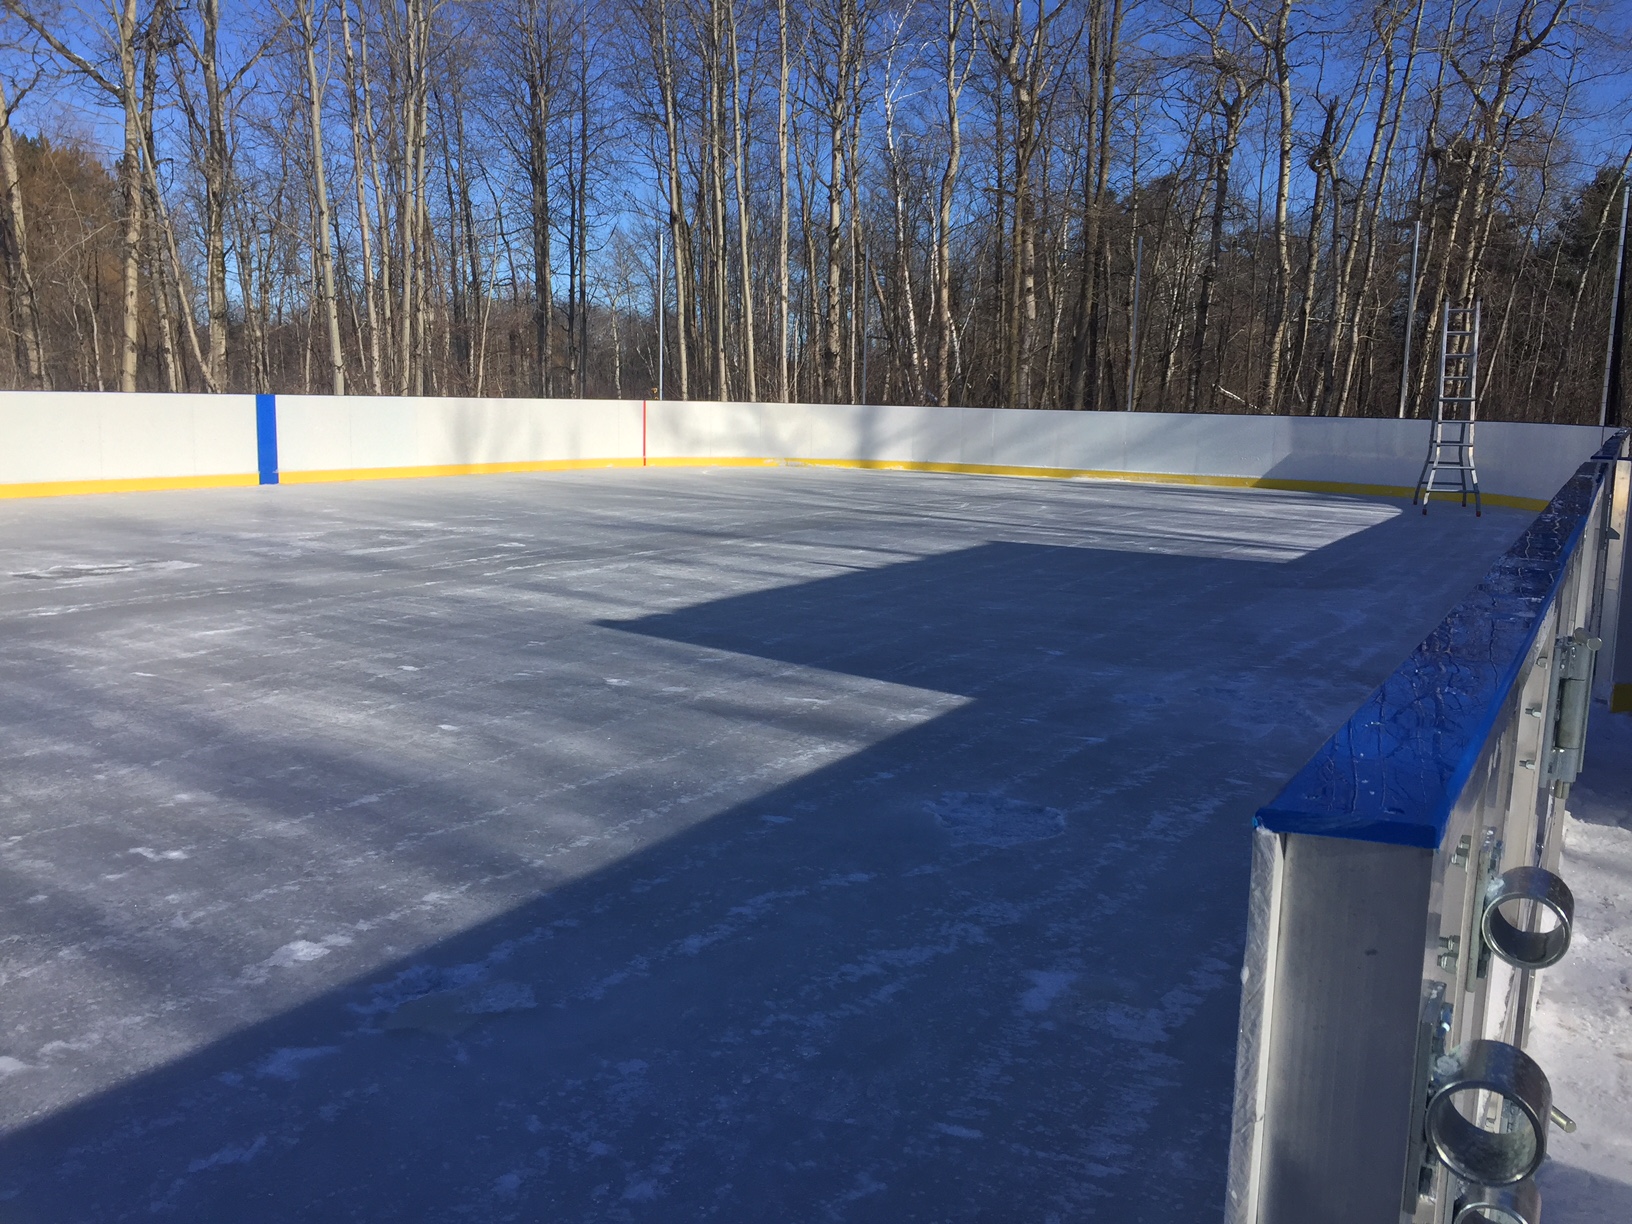 Refrigerated rink with aluminum framed boards